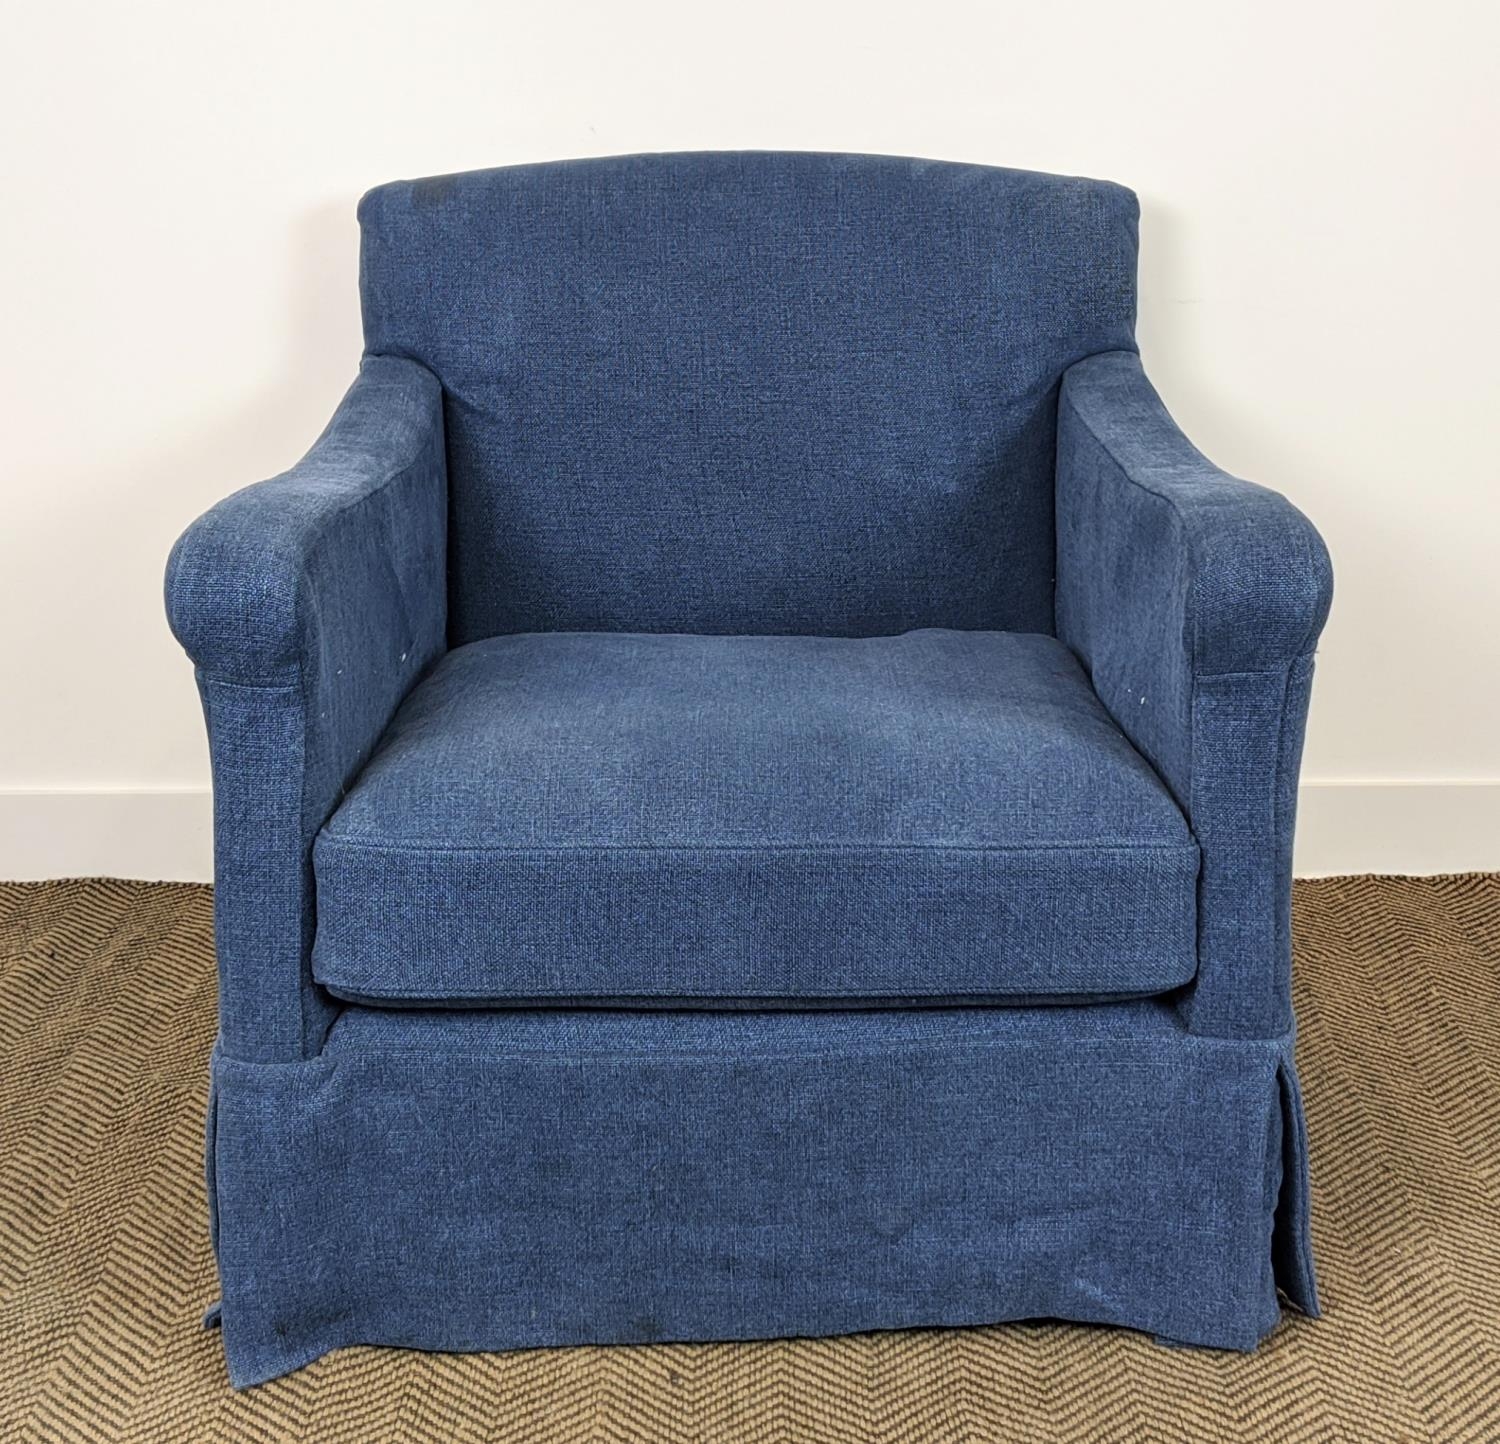 PAOLO MOSCHINO SOFIA ARMCHAIR, in indigo upholstered finish, 836cm W. - Image 4 of 6